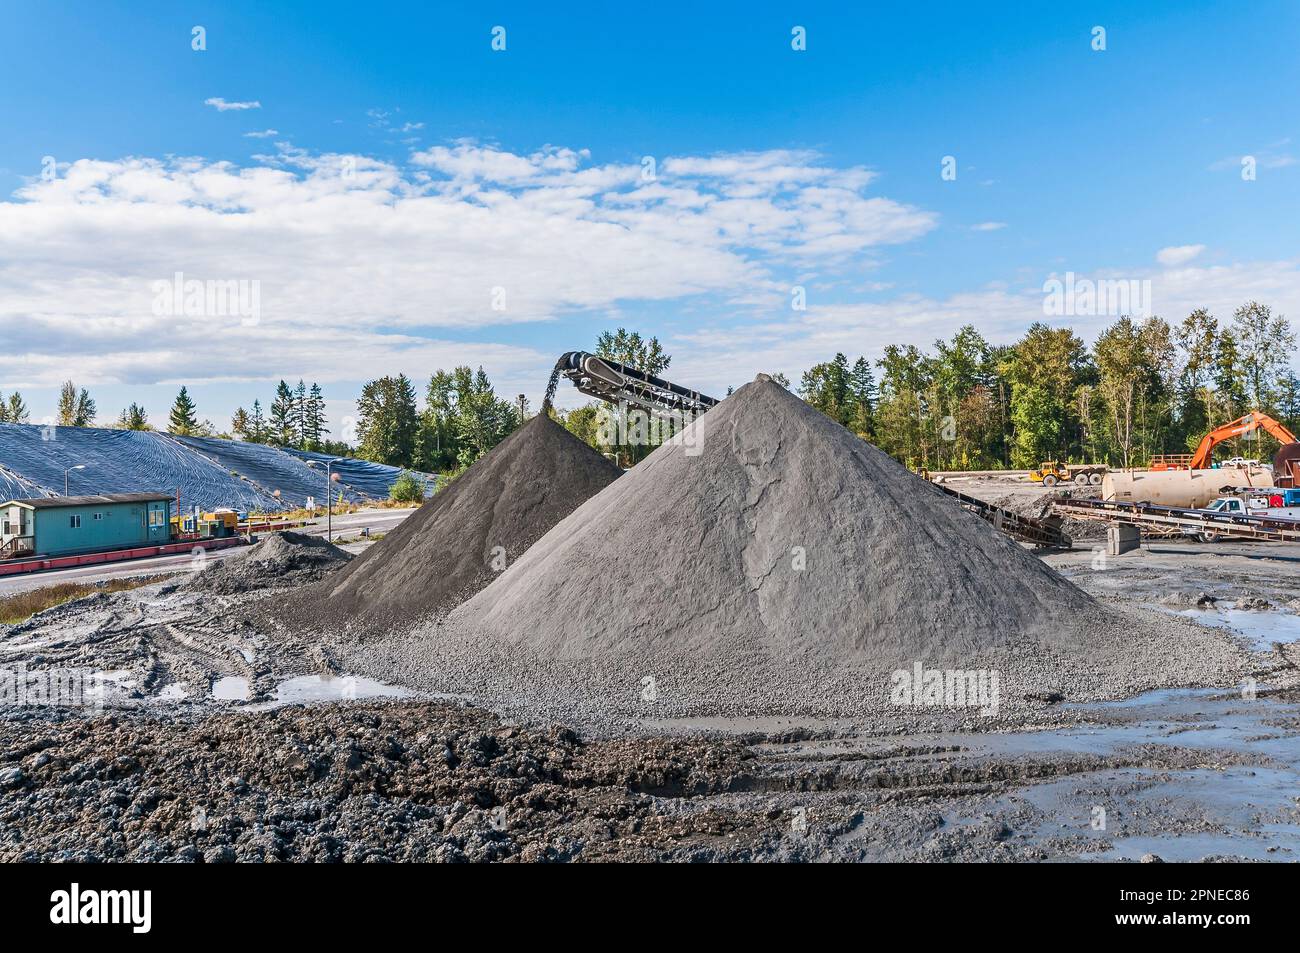 Small peaked, cone-shaped hills of dirt dumped by a conveyor belt in an active landfill. Stock Photo